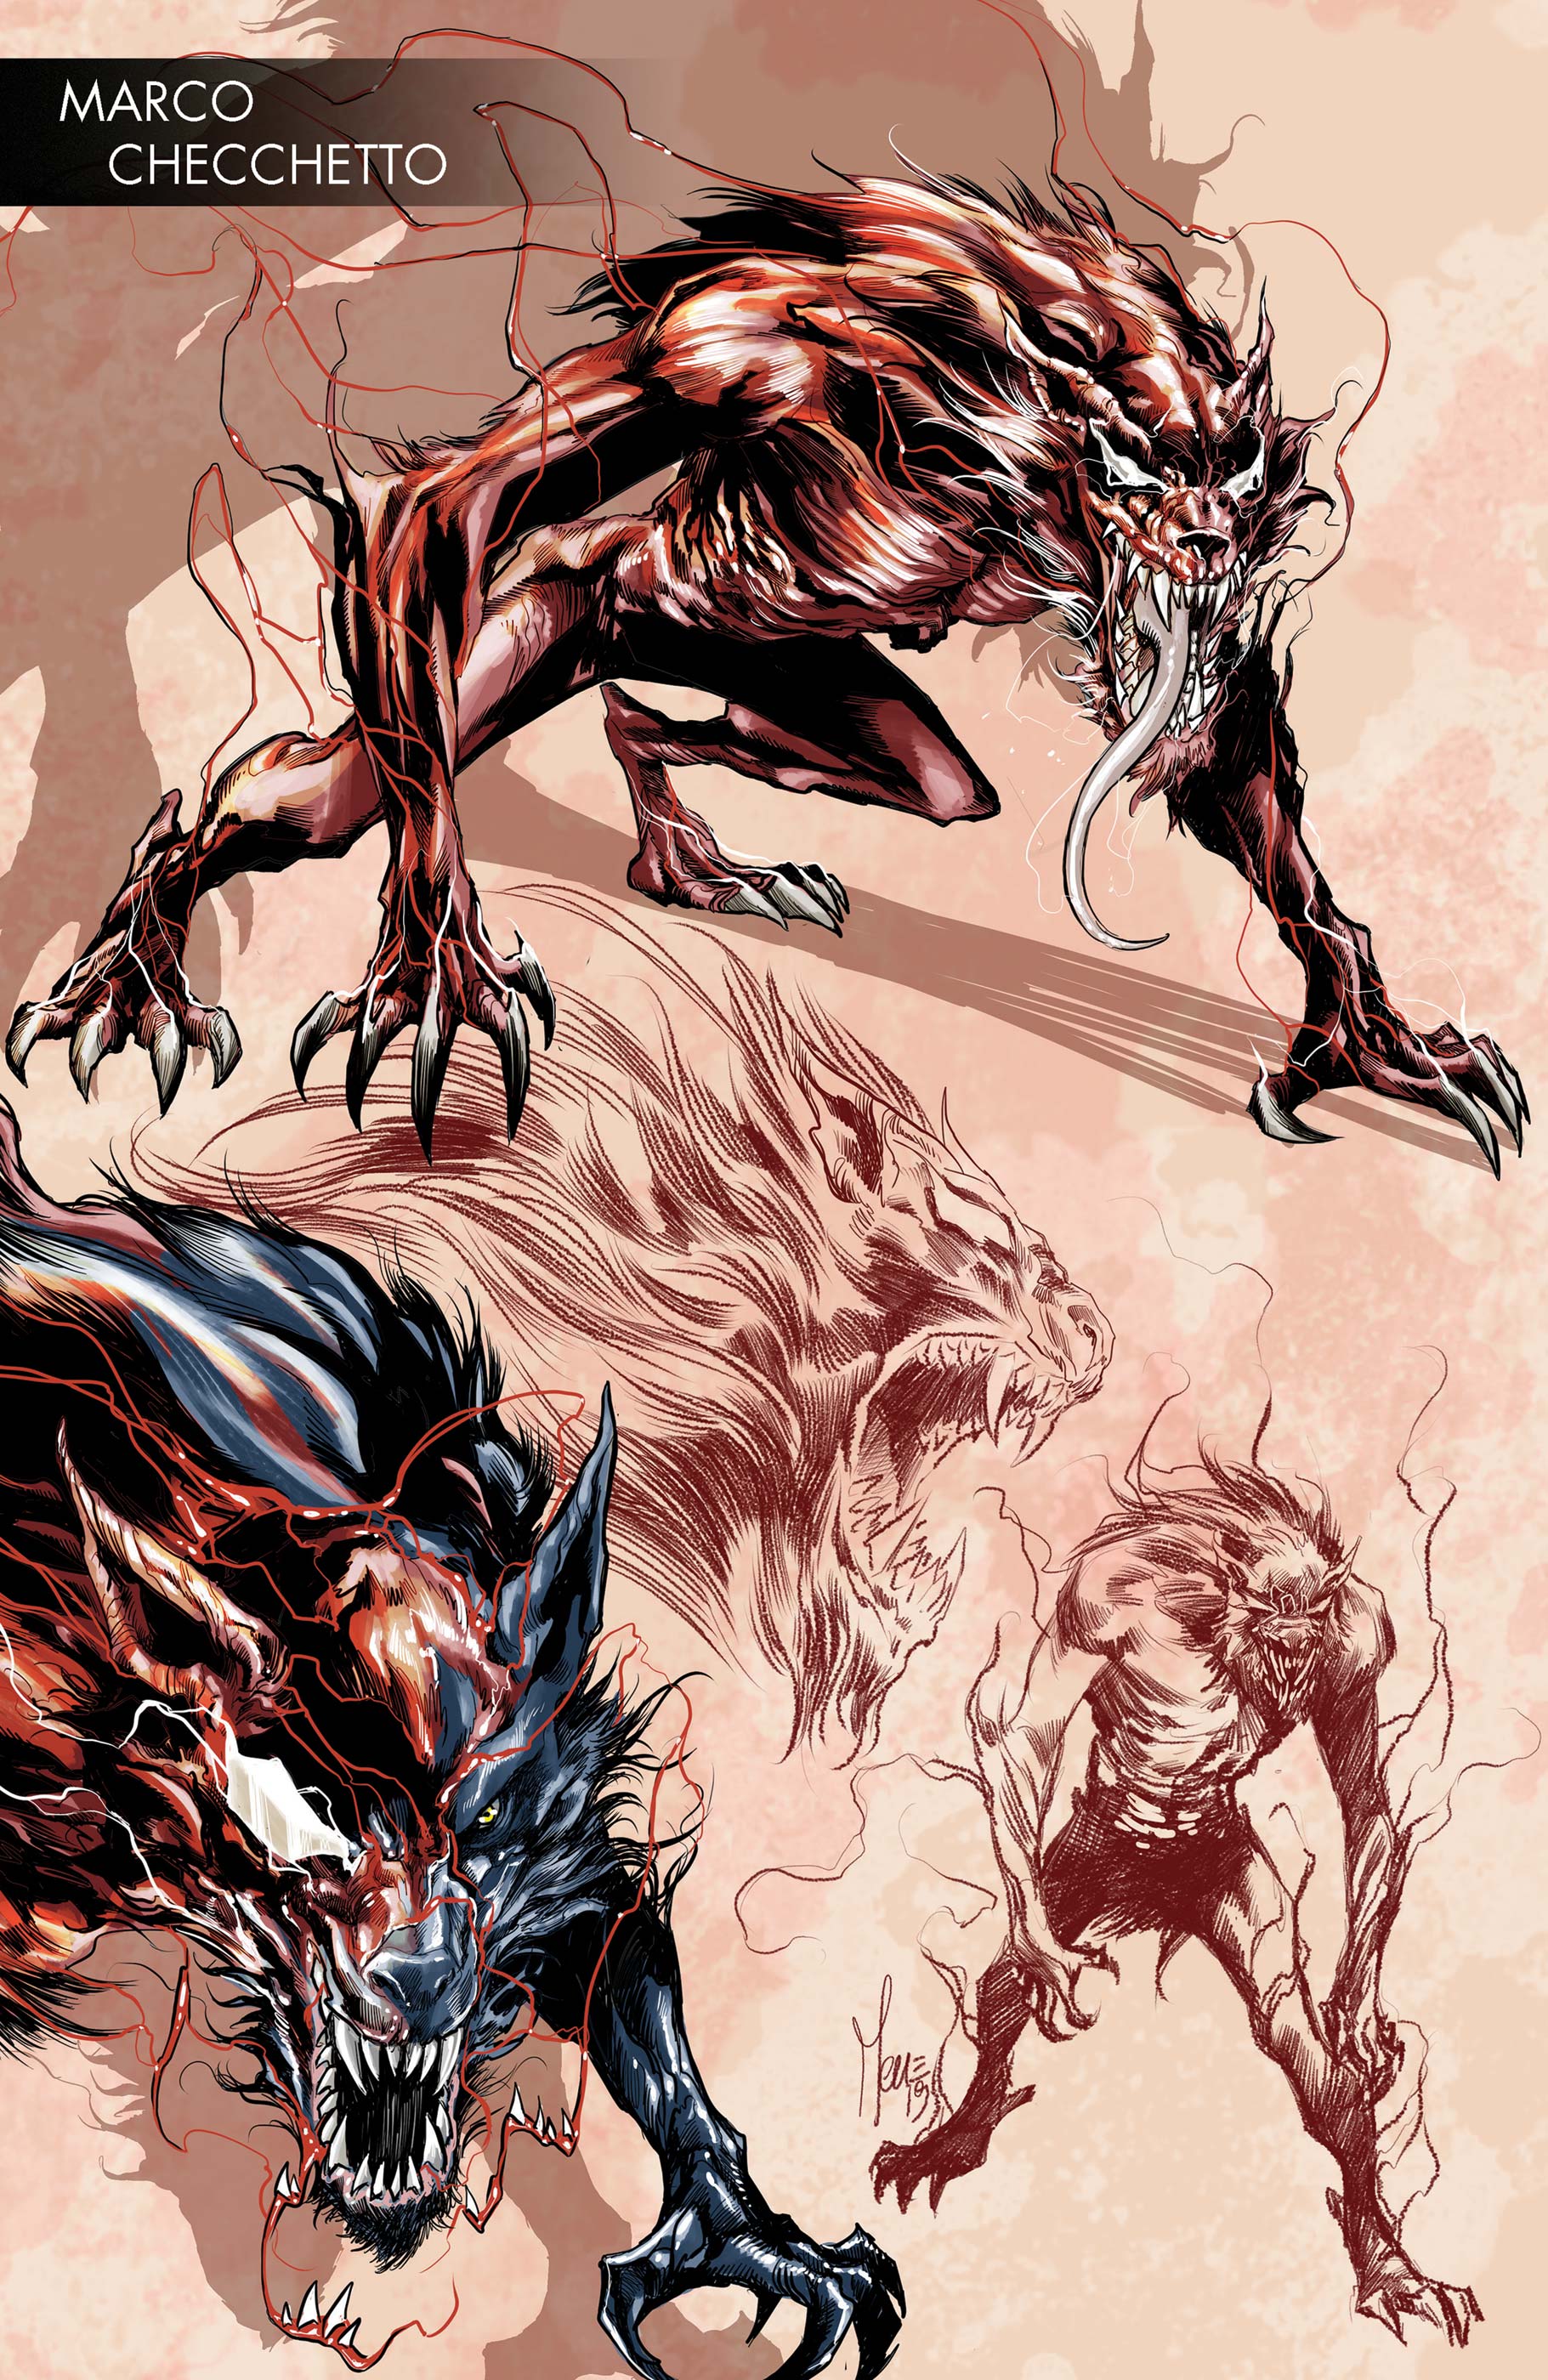 Absolute Carnage (2019) #2 (Variant)